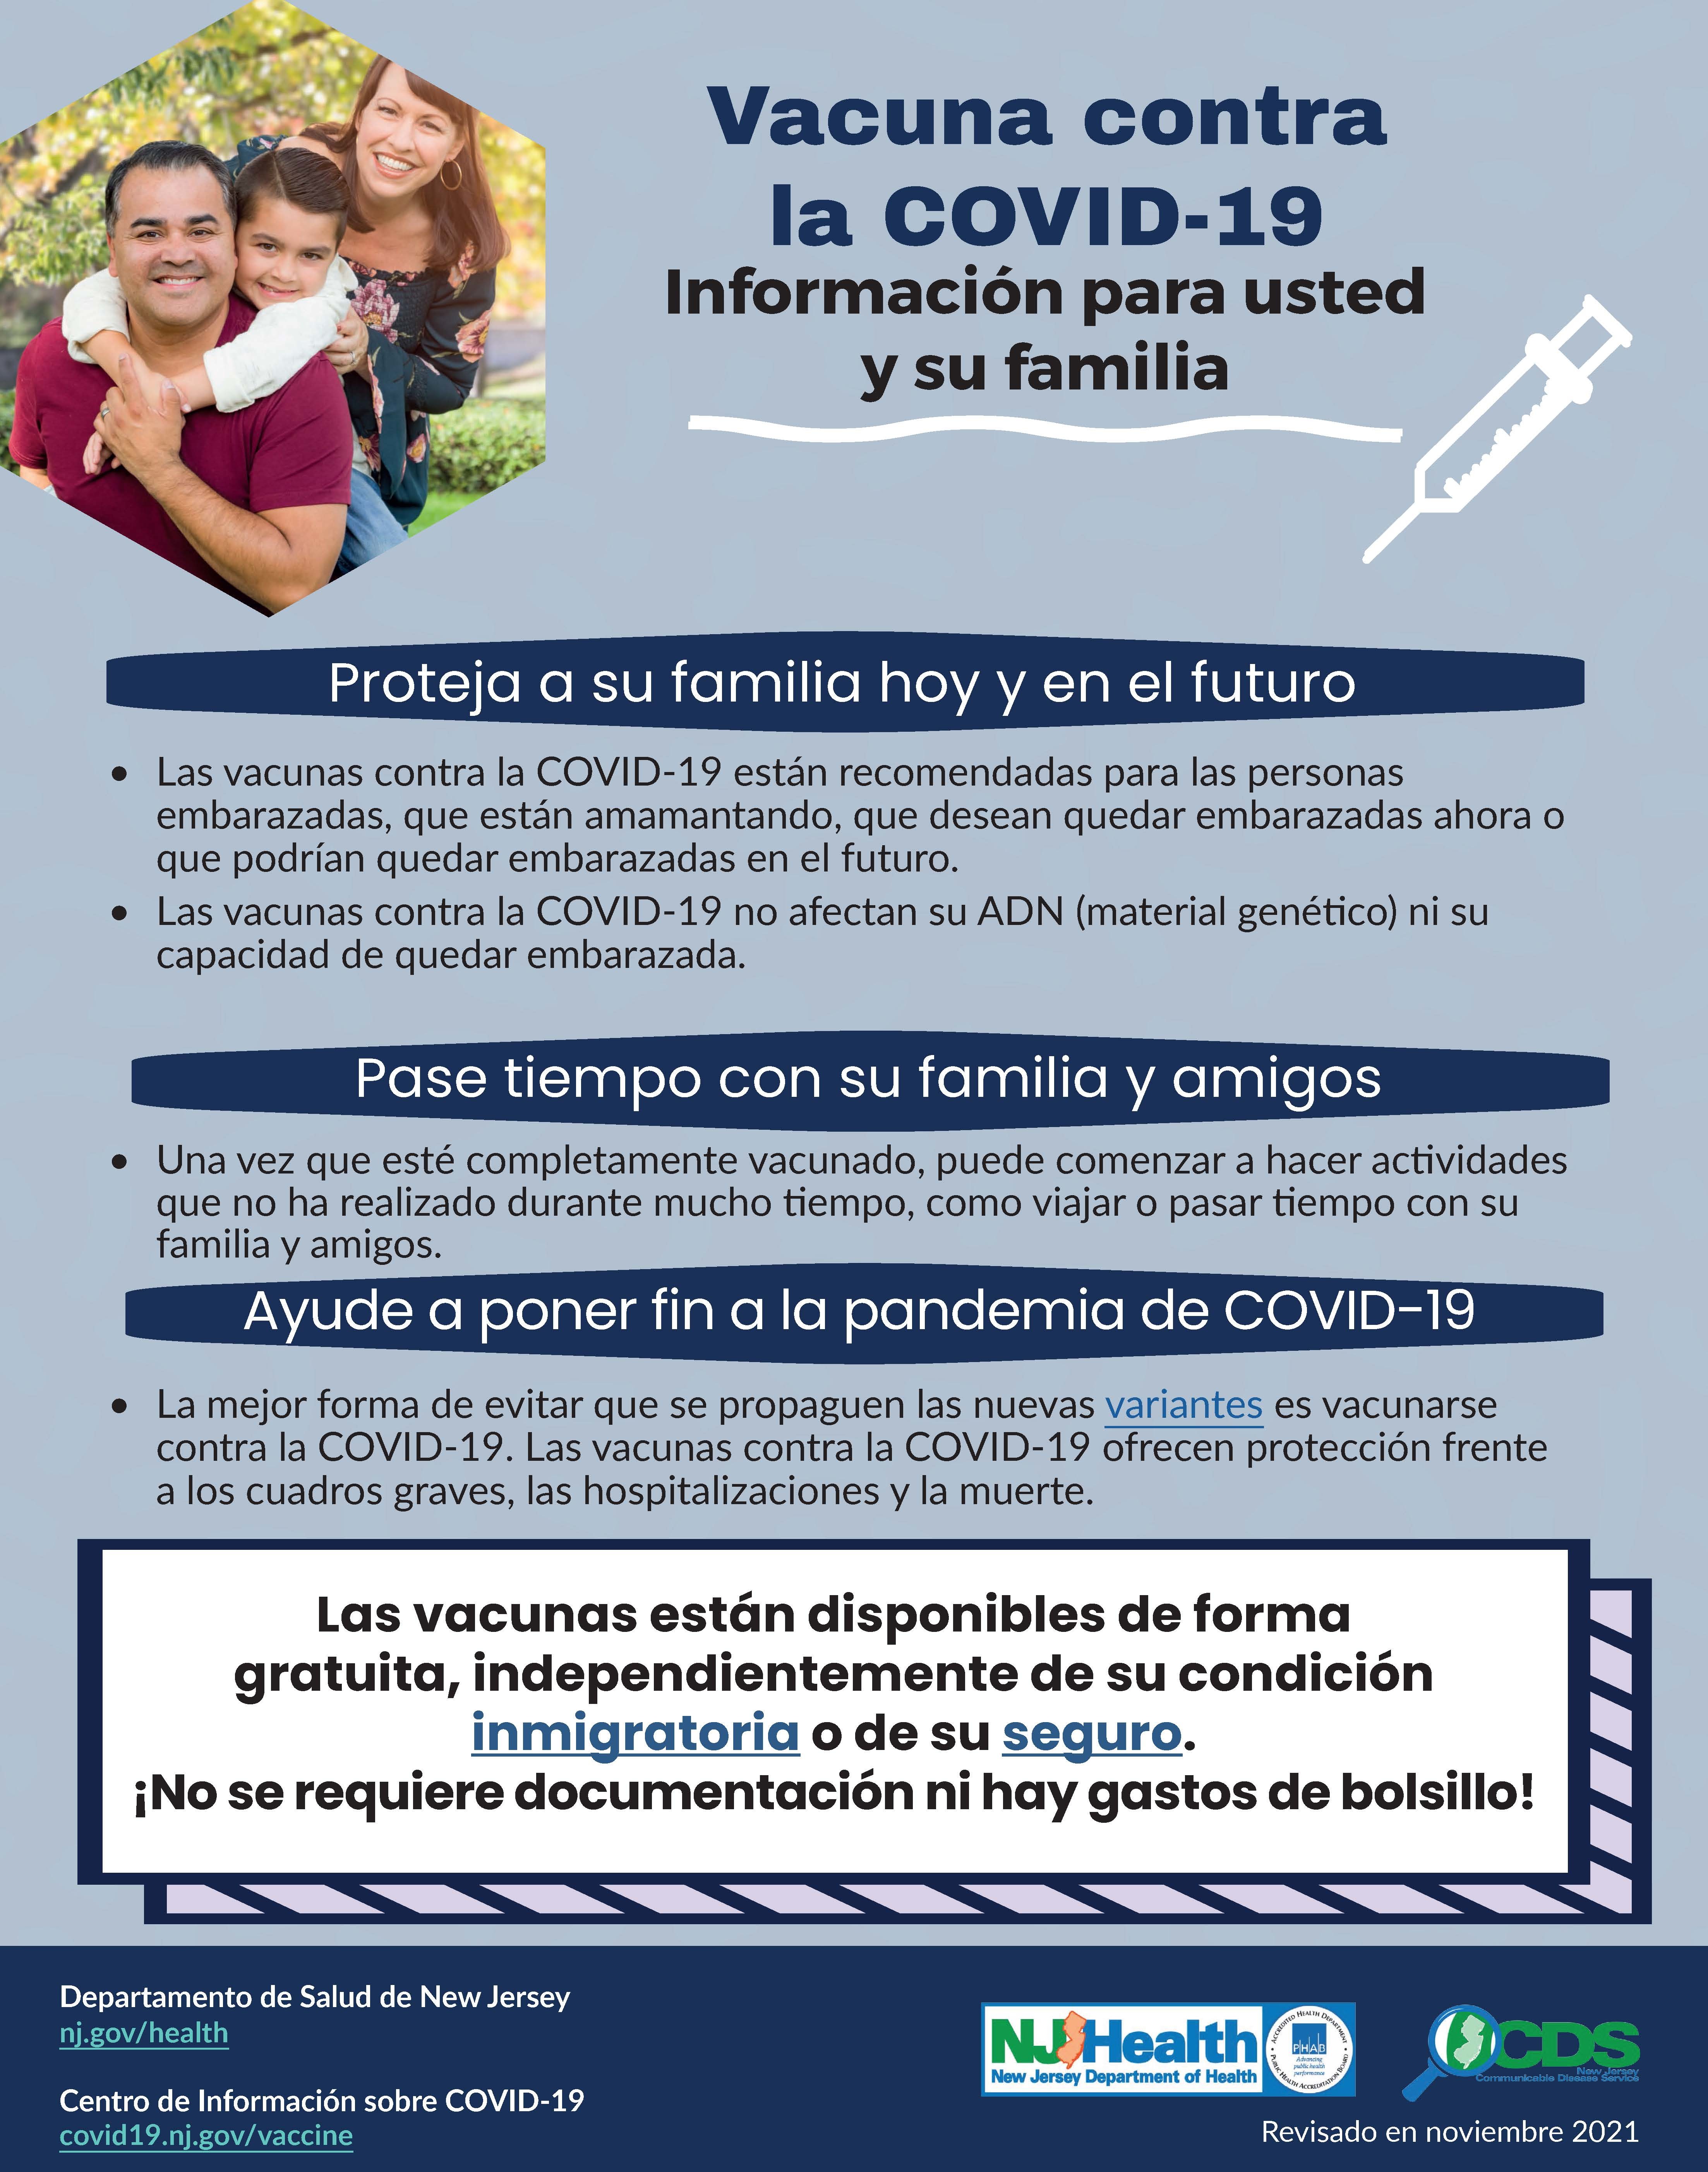 Protect Family Now and For the Future flyer (Spanish)